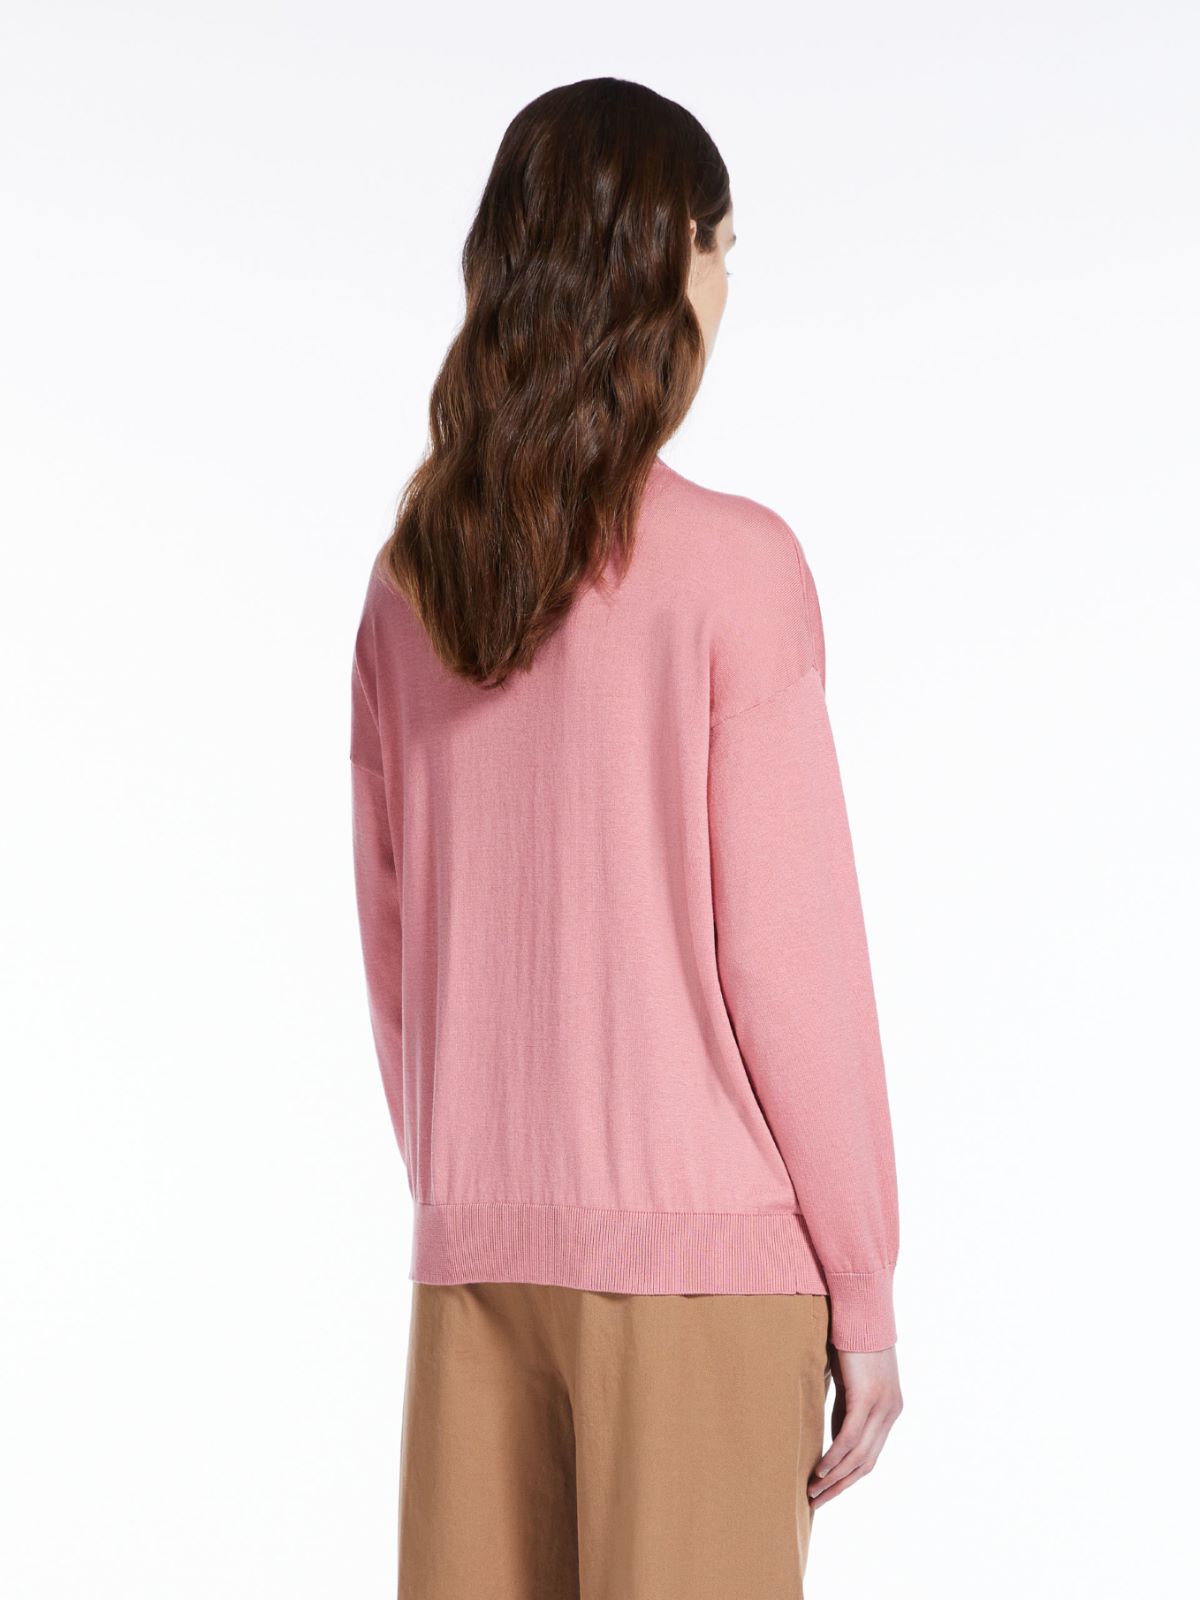 Cotton and silk yarn sweater - ANTIQUE ROSE - Weekend Max Mara - 3